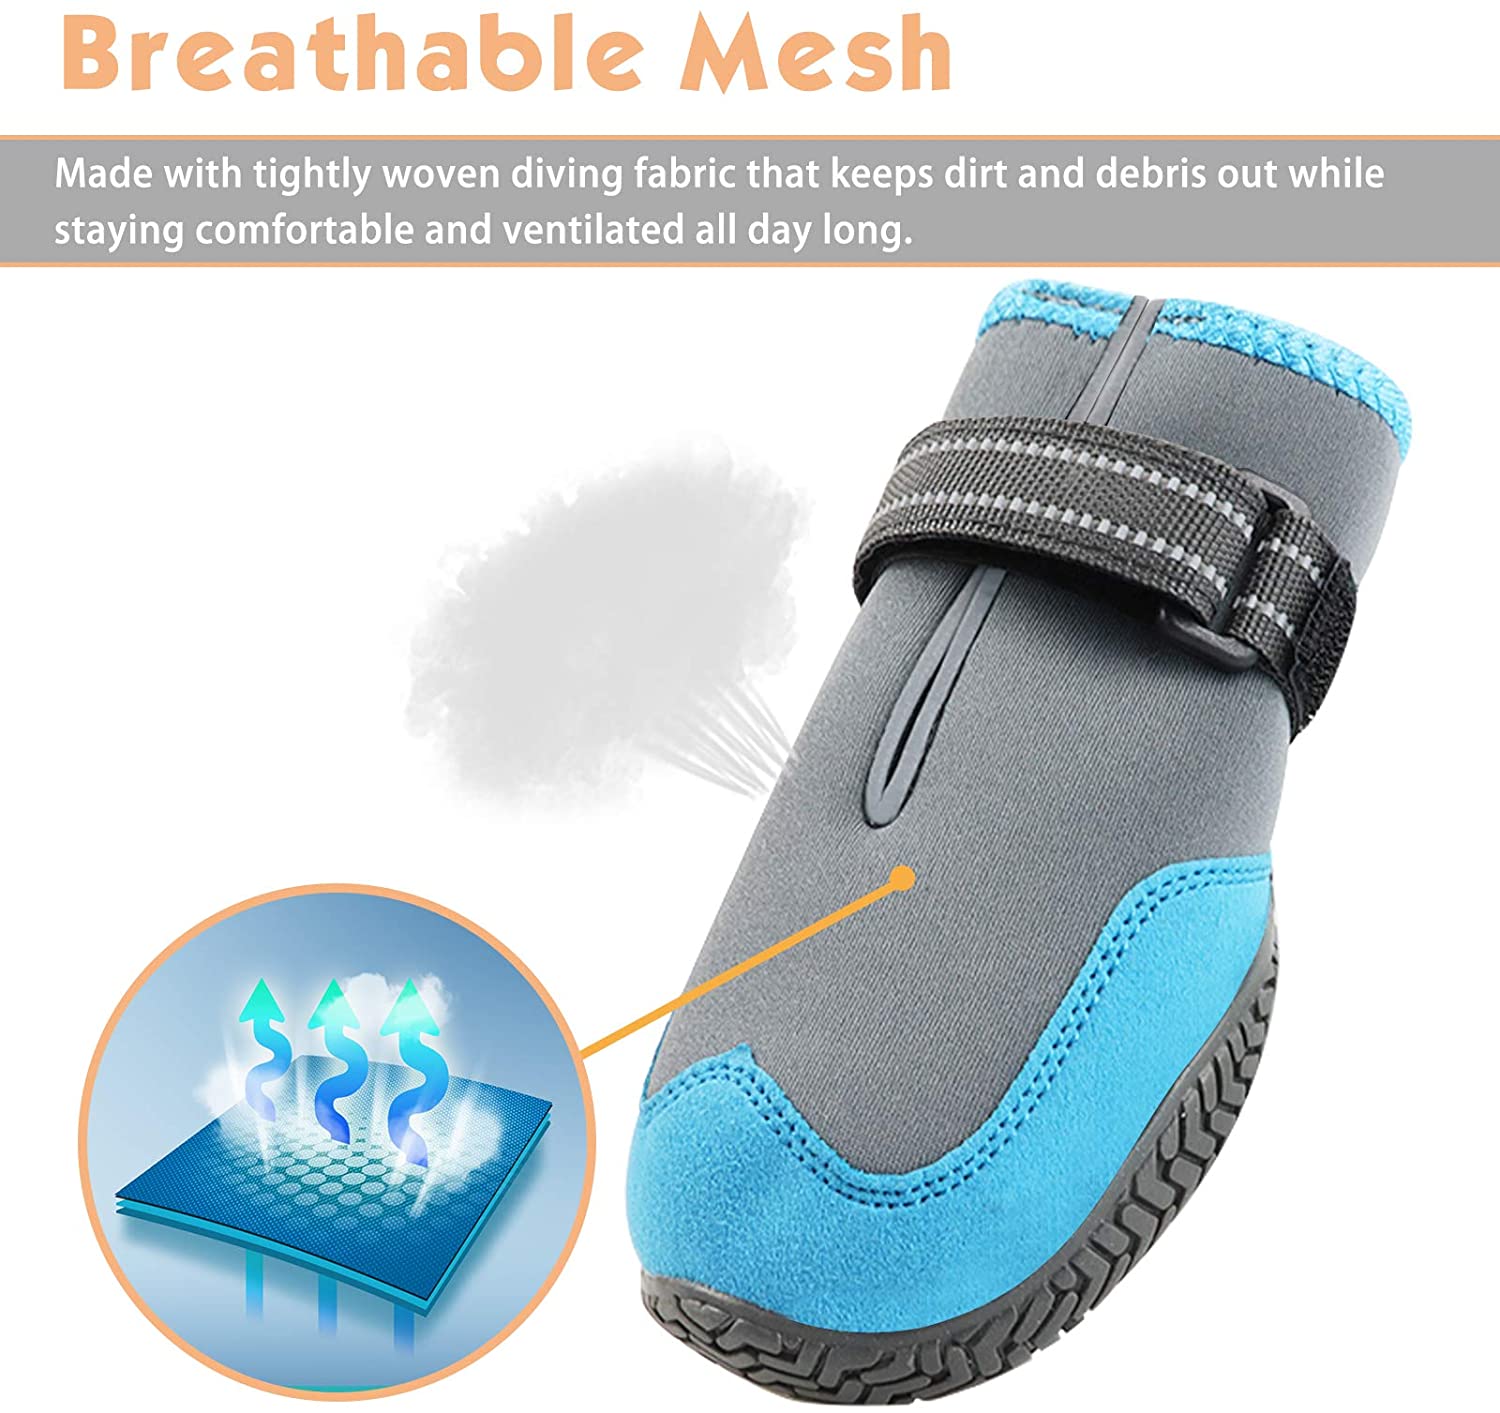 KUTKUT Waterproof Dog Shoes for Hot Pavement Dogs Boots Heat Protection Paw Breathable Non-Slip Rain Shoes Adjustable Reflective Straps for Small Medium Large Dogs 4PCS Blue - kutkutstyle